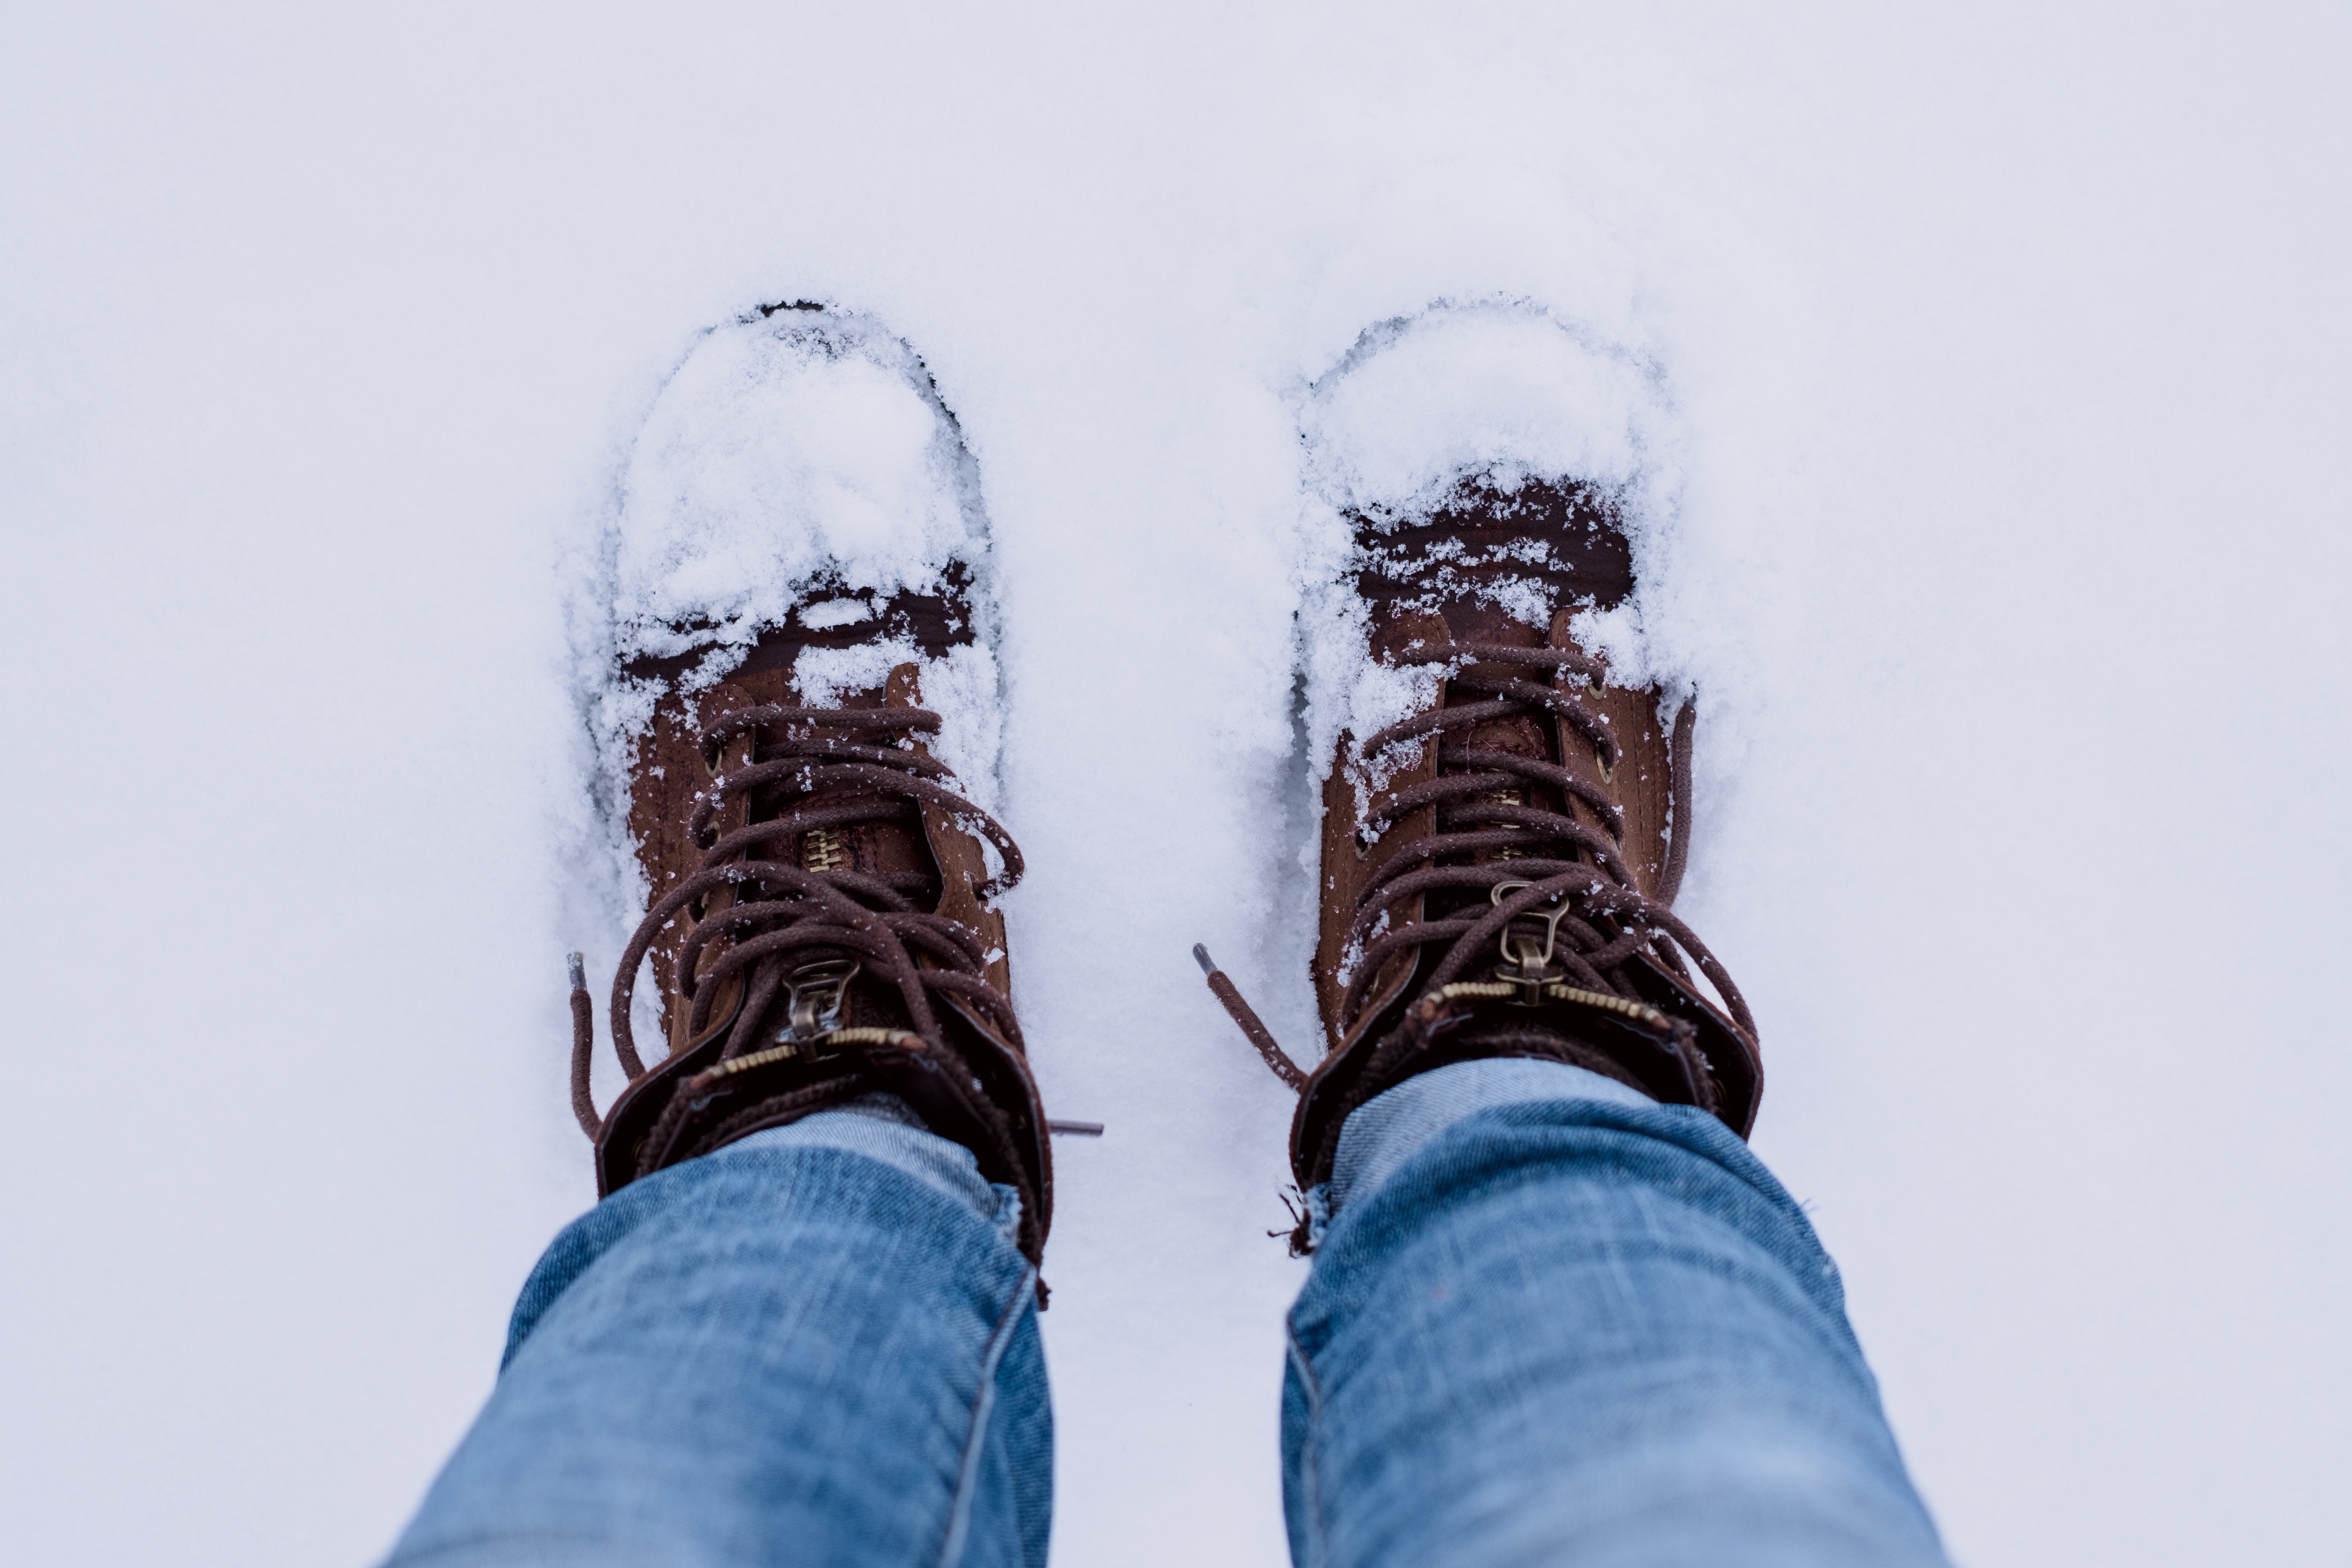 Protect your carpets from snowy boots this winter!